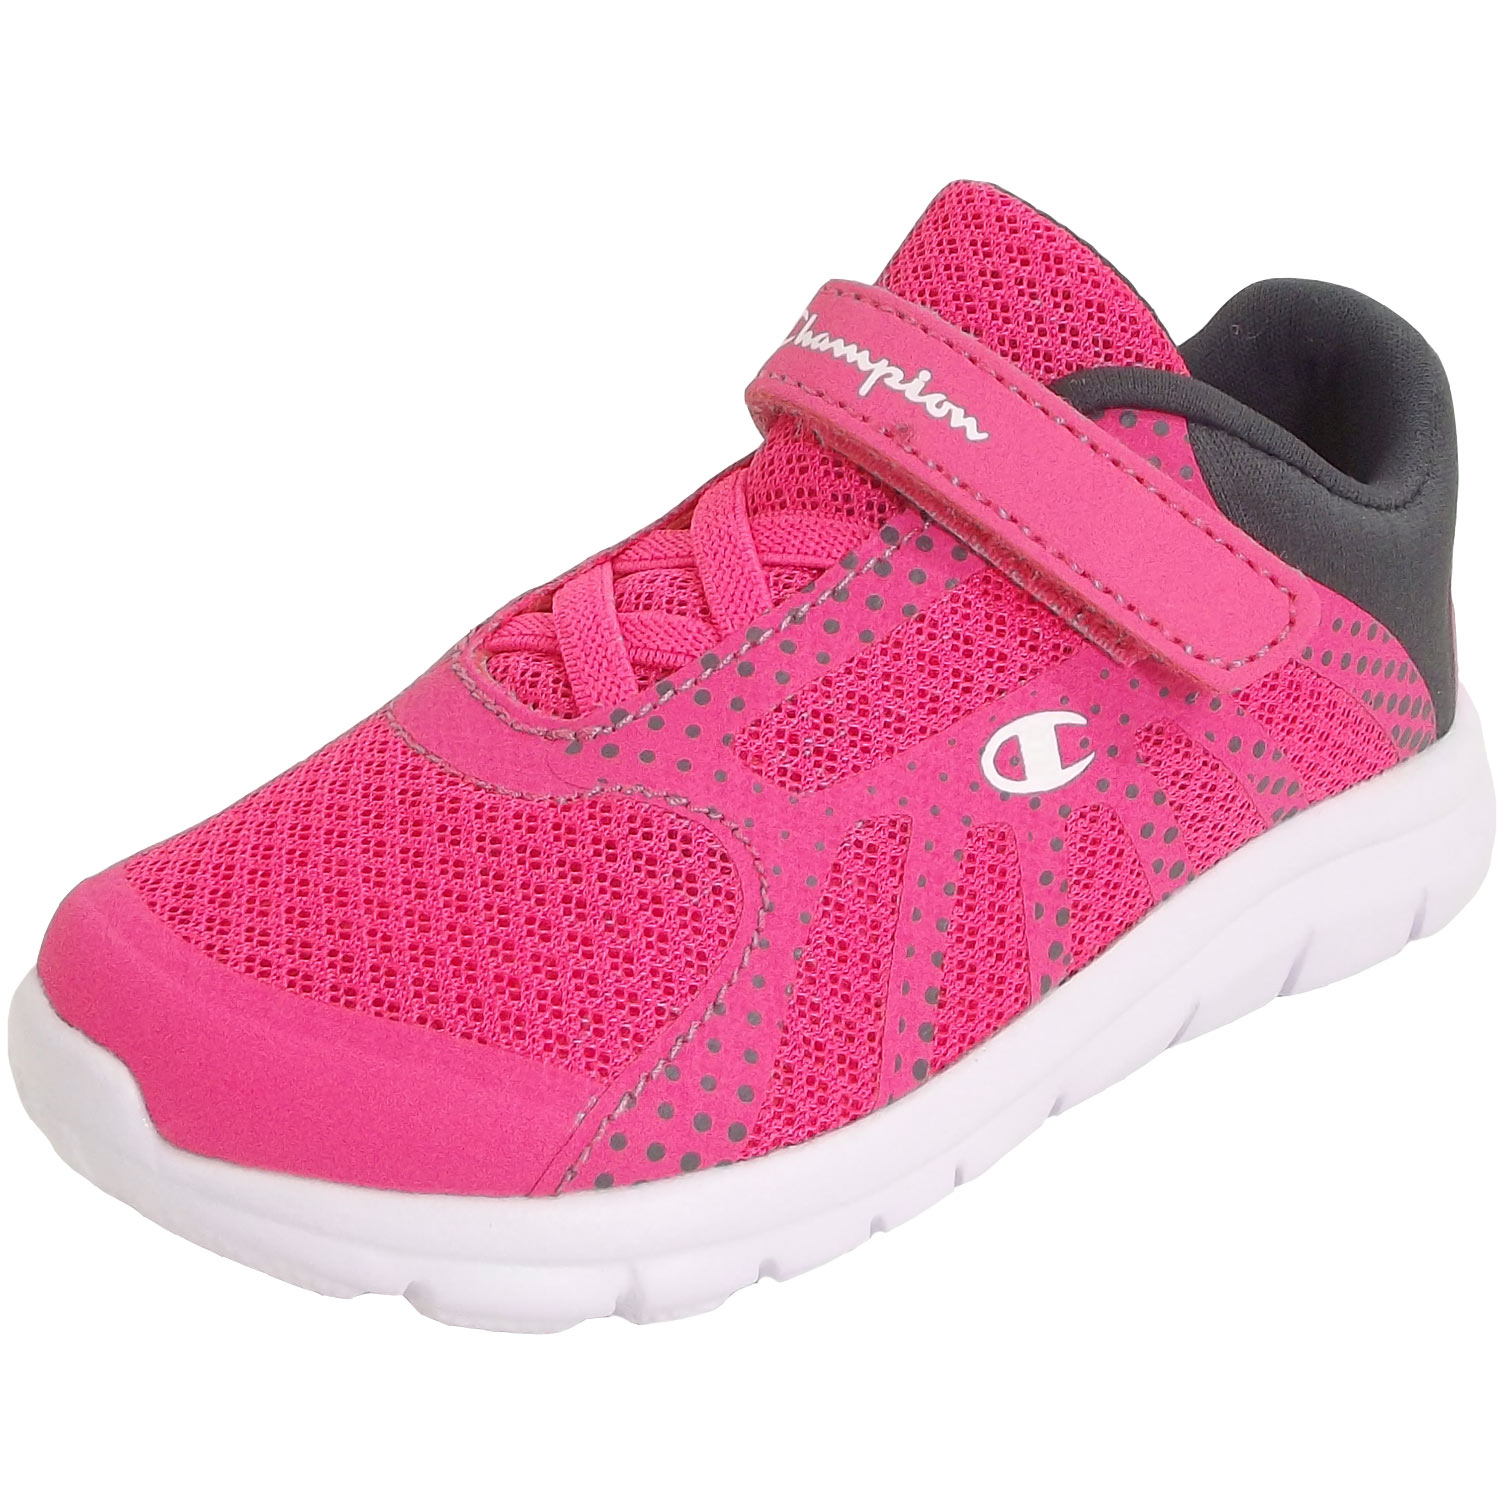 Champion Alpha Girl Sneakers pink (pip 